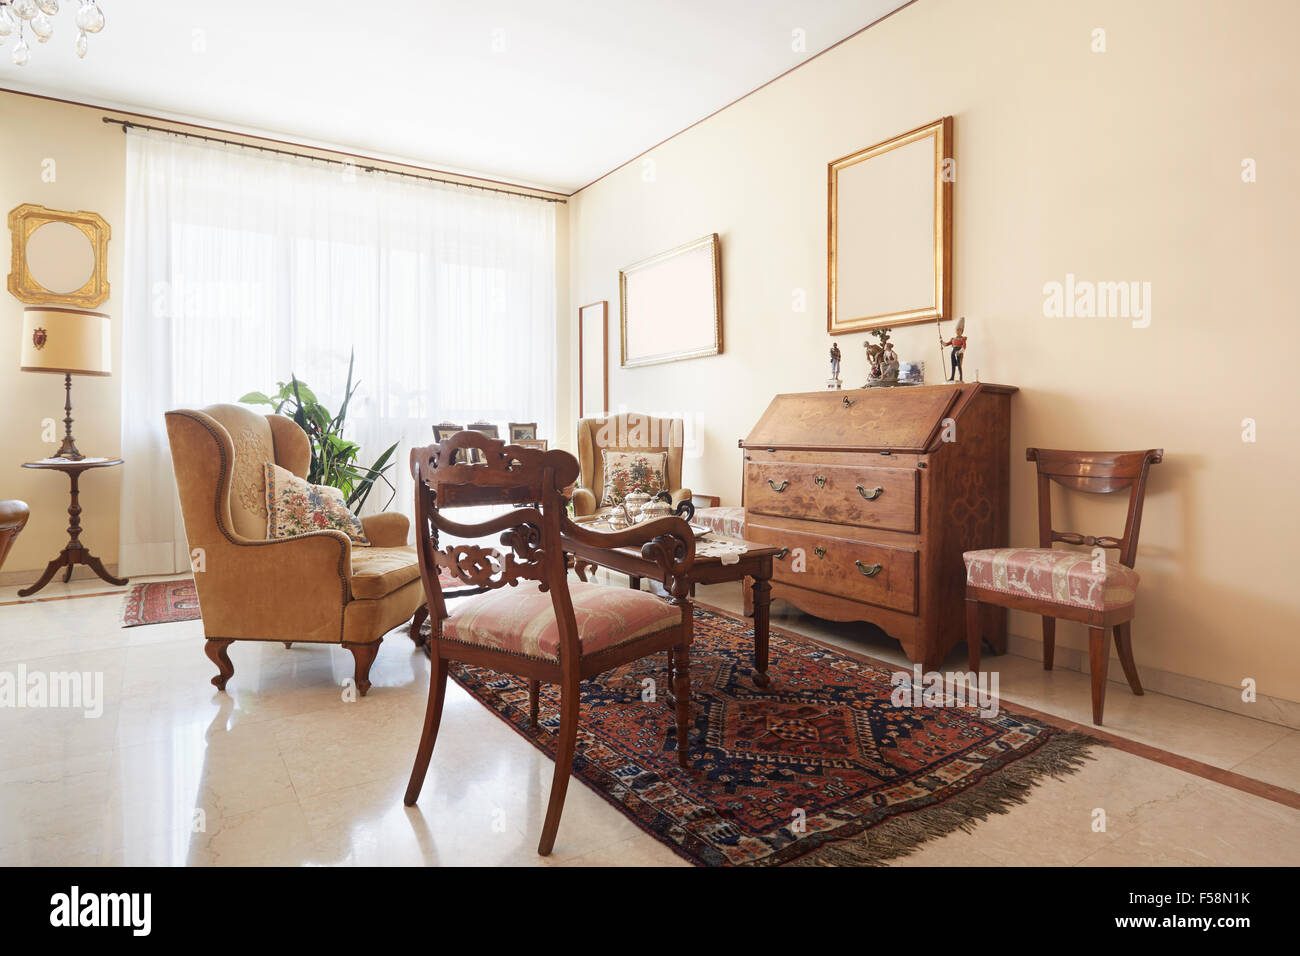 Living room, classic interior with antiquities Stock Photo